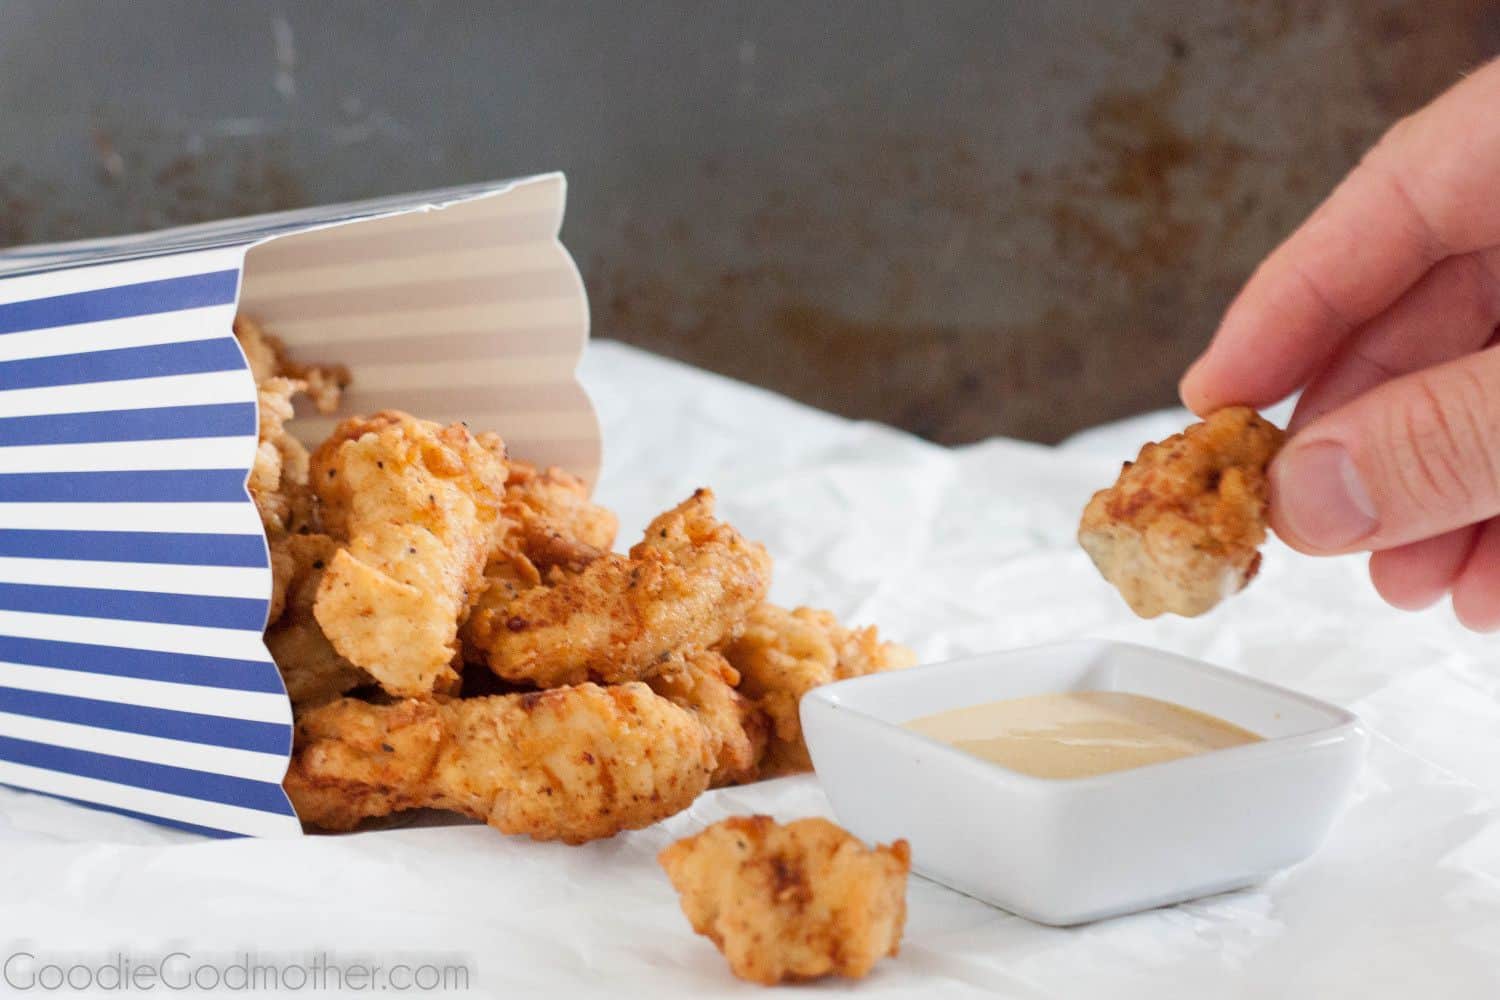 It's easy to make your own Chick-fil-A nuggets at home! Recipe on GoodieGodmother.com